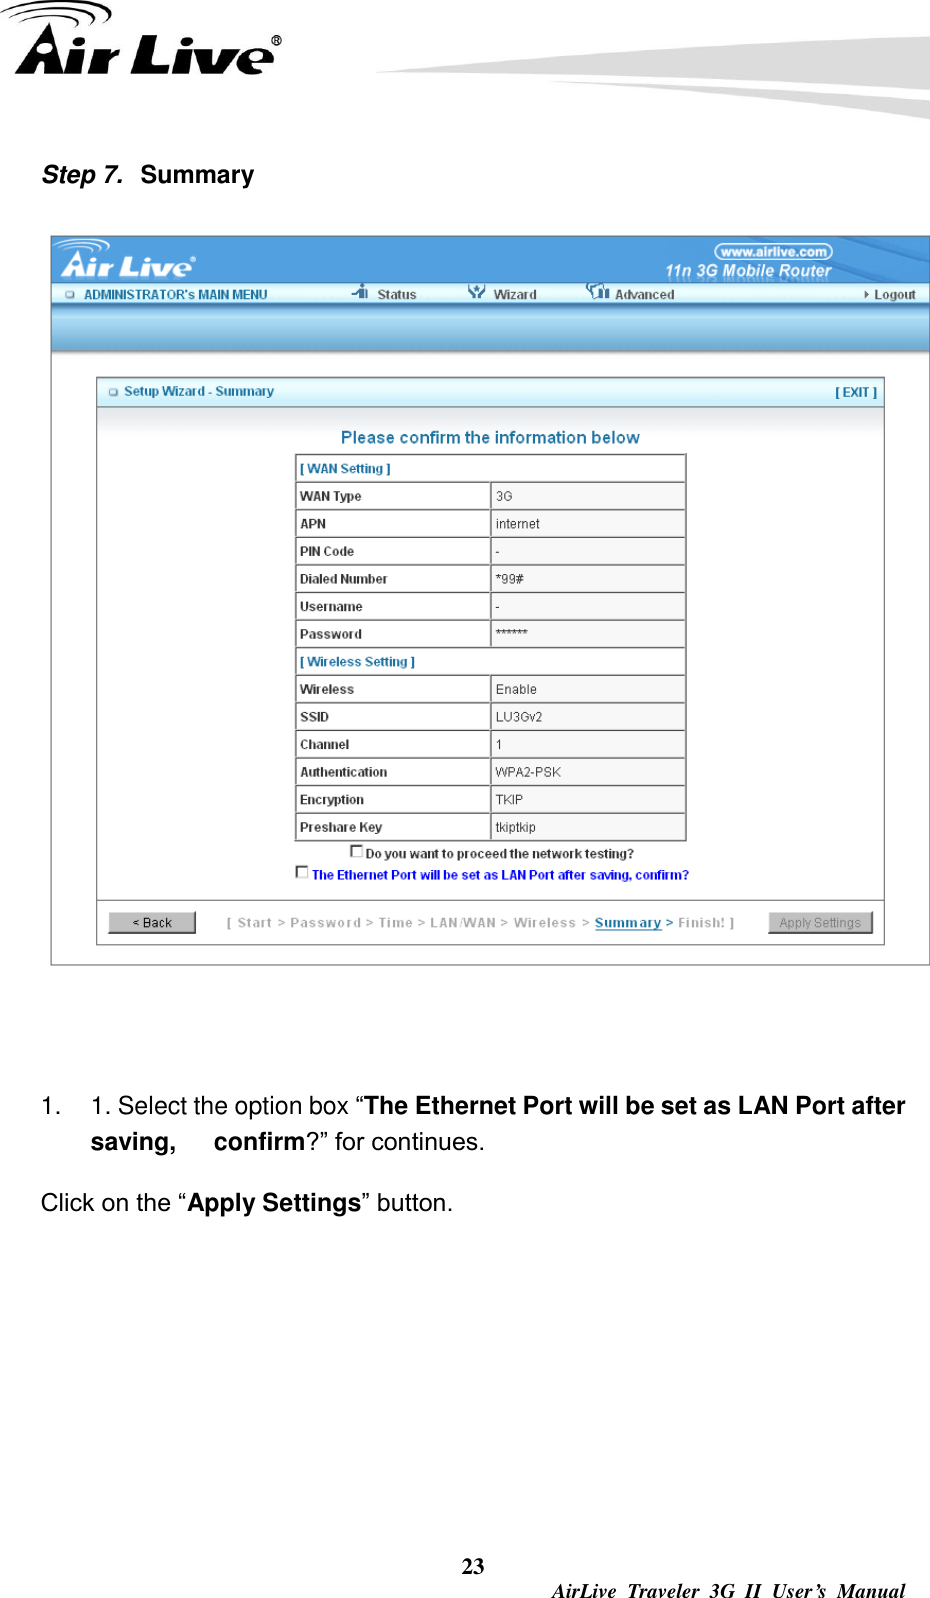  23  AirLive  Traveler  3G  II  User’s  Manual Step 7.  Summary   1.  1. Select the option box “The Ethernet Port will be set as LAN Port after saving,      confirm?” for continues. Click on the “Apply Settings” button.      